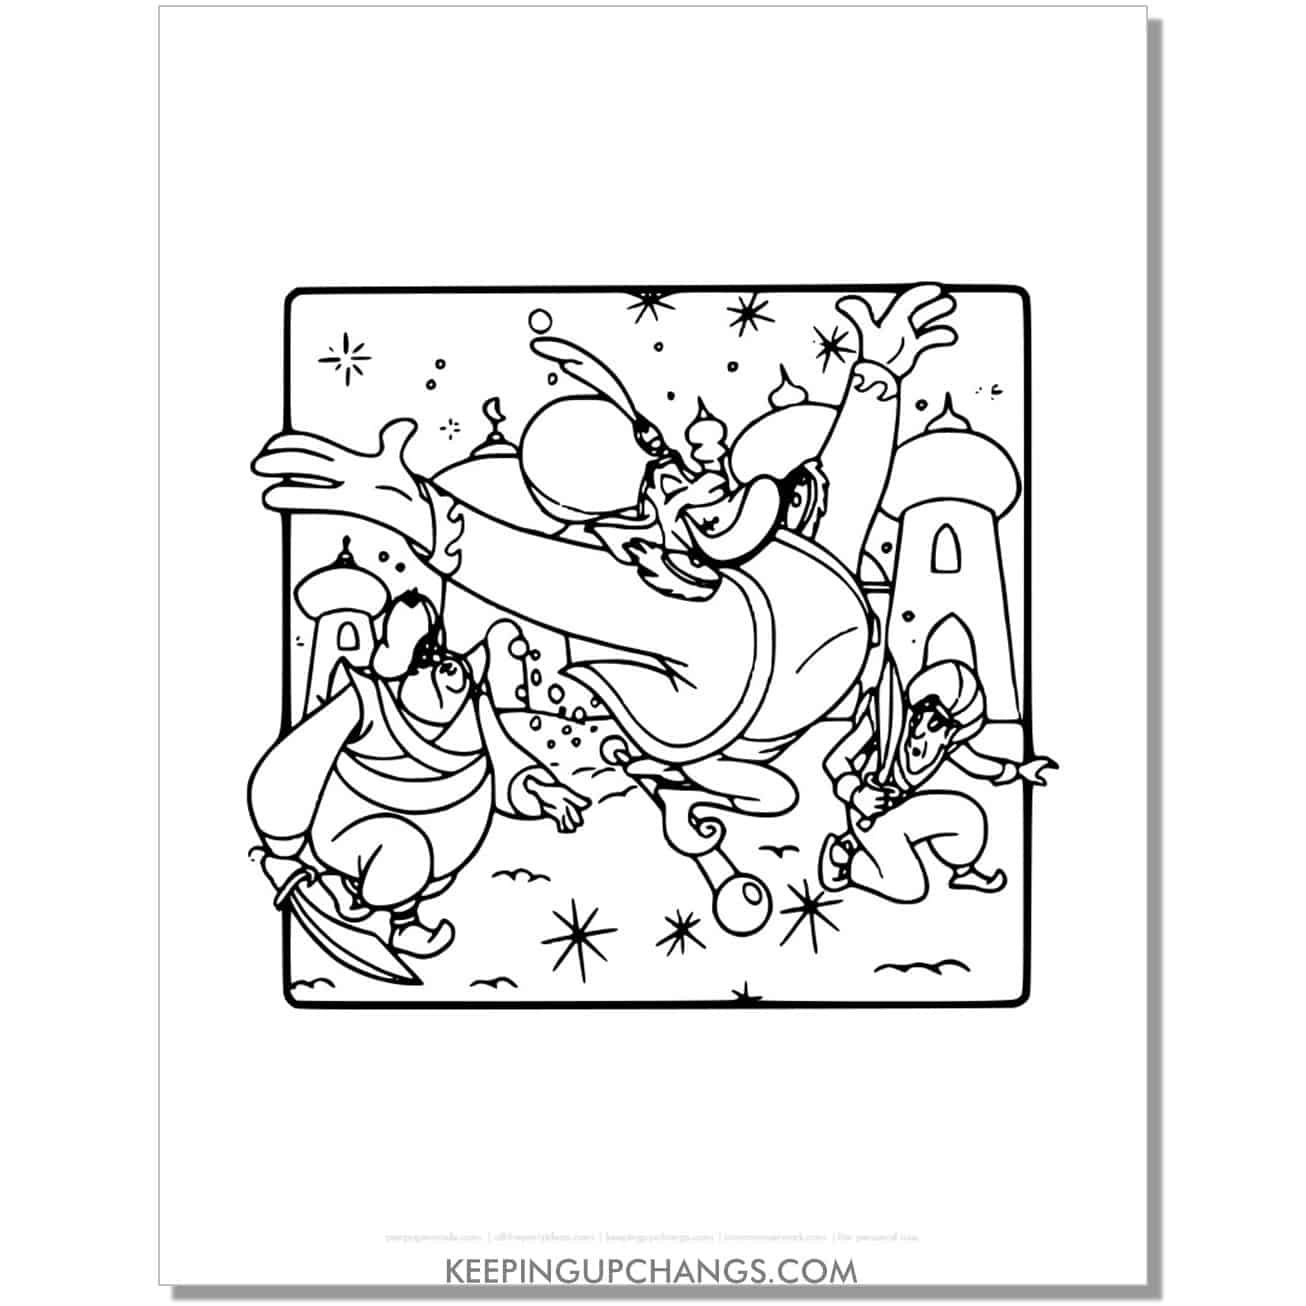 aladdin genie arrives in arabia coloring page, sheet.